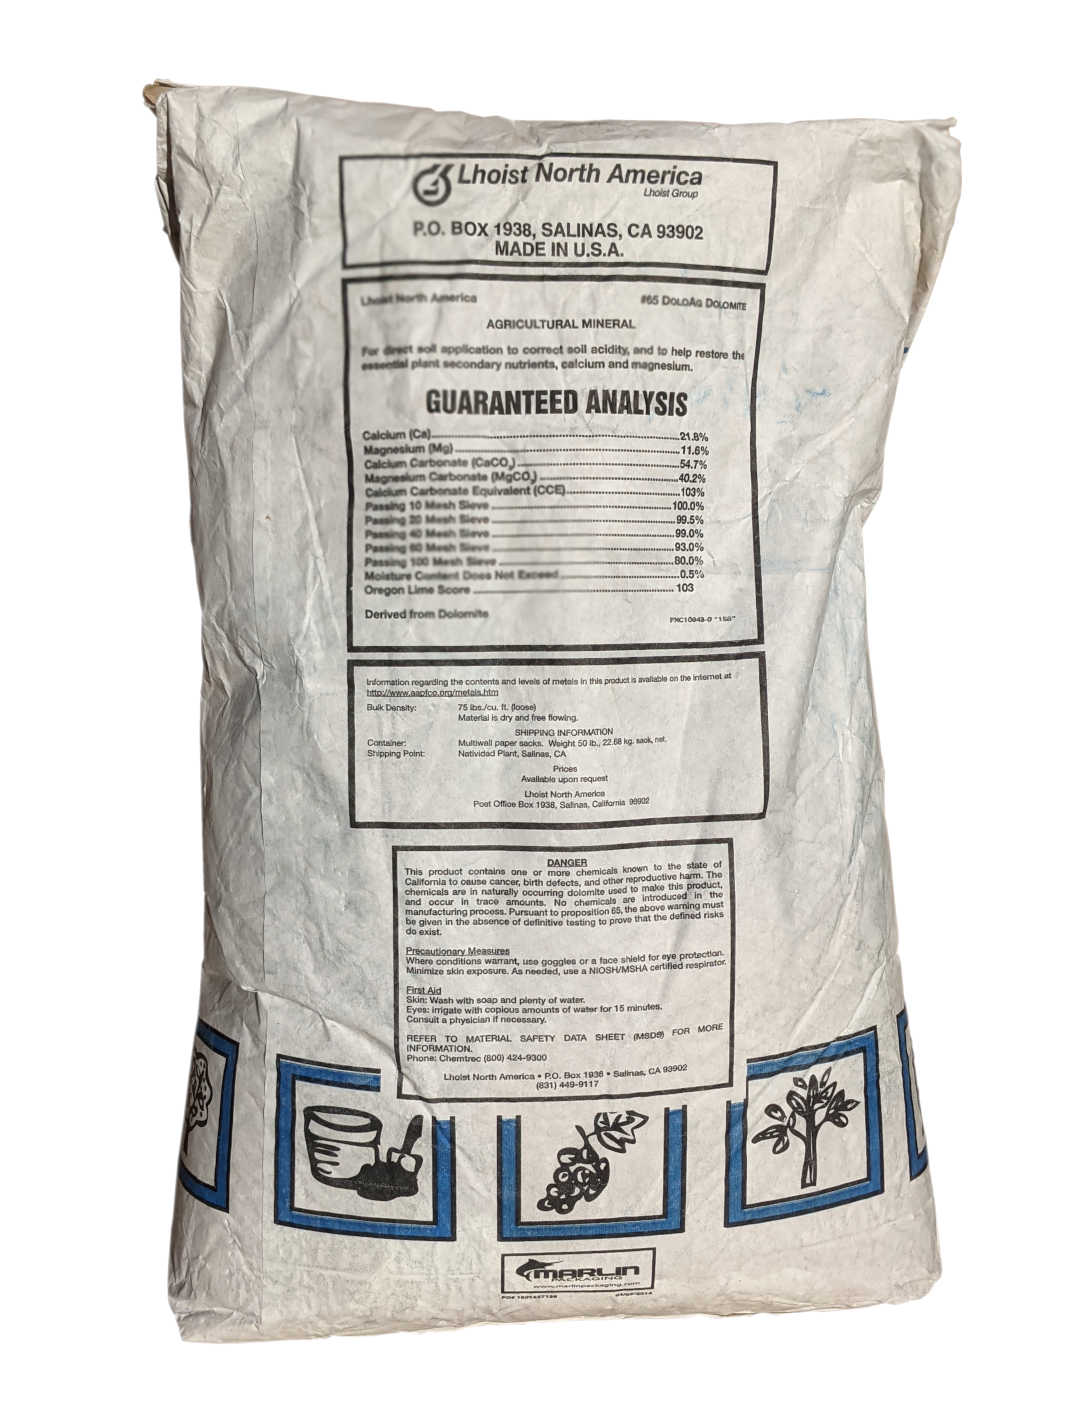 Back of 50 pound bag of Dolomite Lime Calcium Magnesium Dicarbonate Mineral